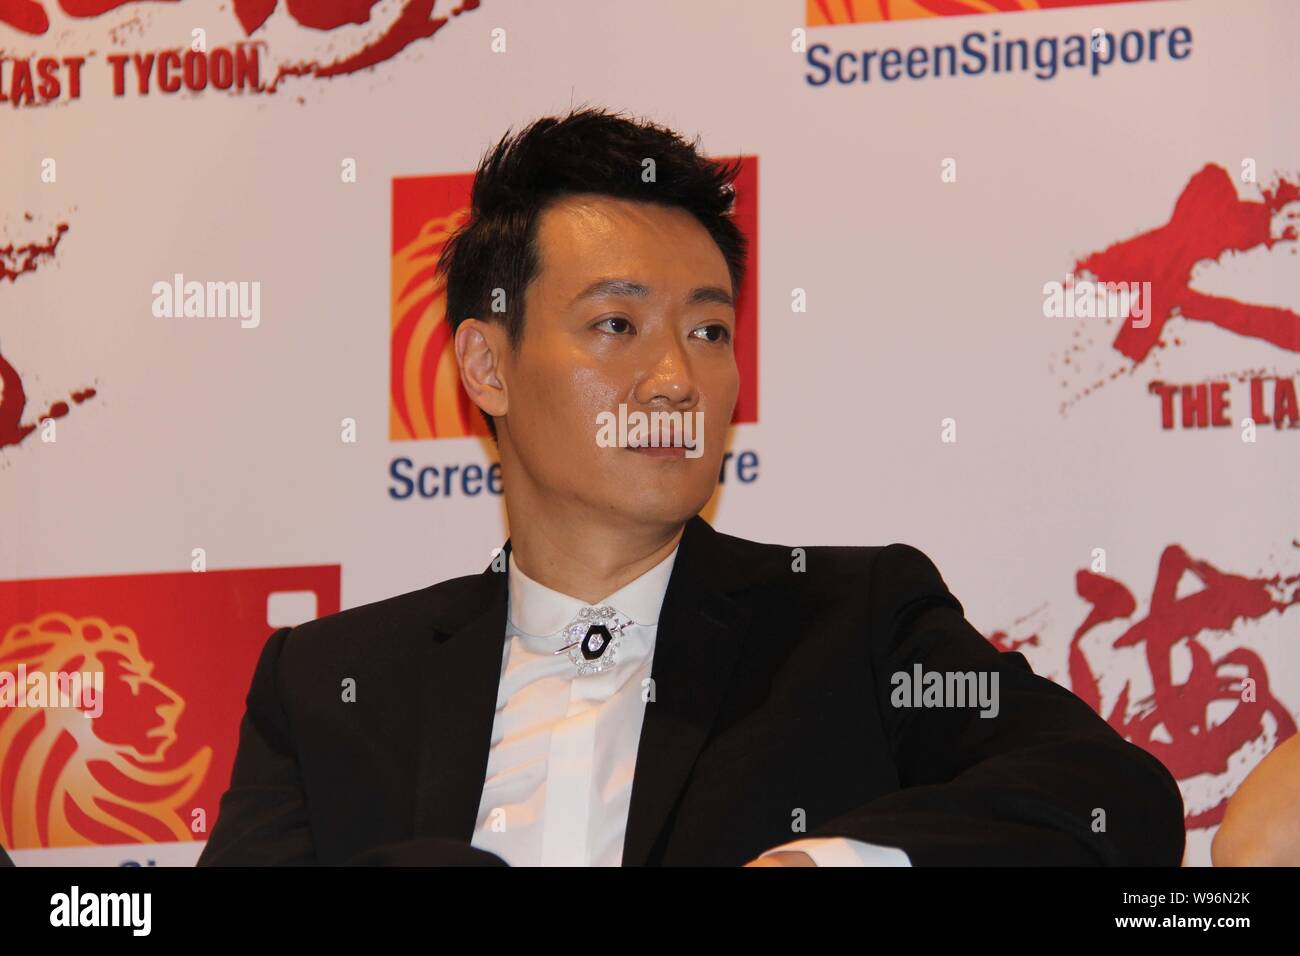 Actor Xin Bai Qing attends a press conference for his latest movie,The Last Tycoon, in Singapore, 4 December 2012. Stock Photo